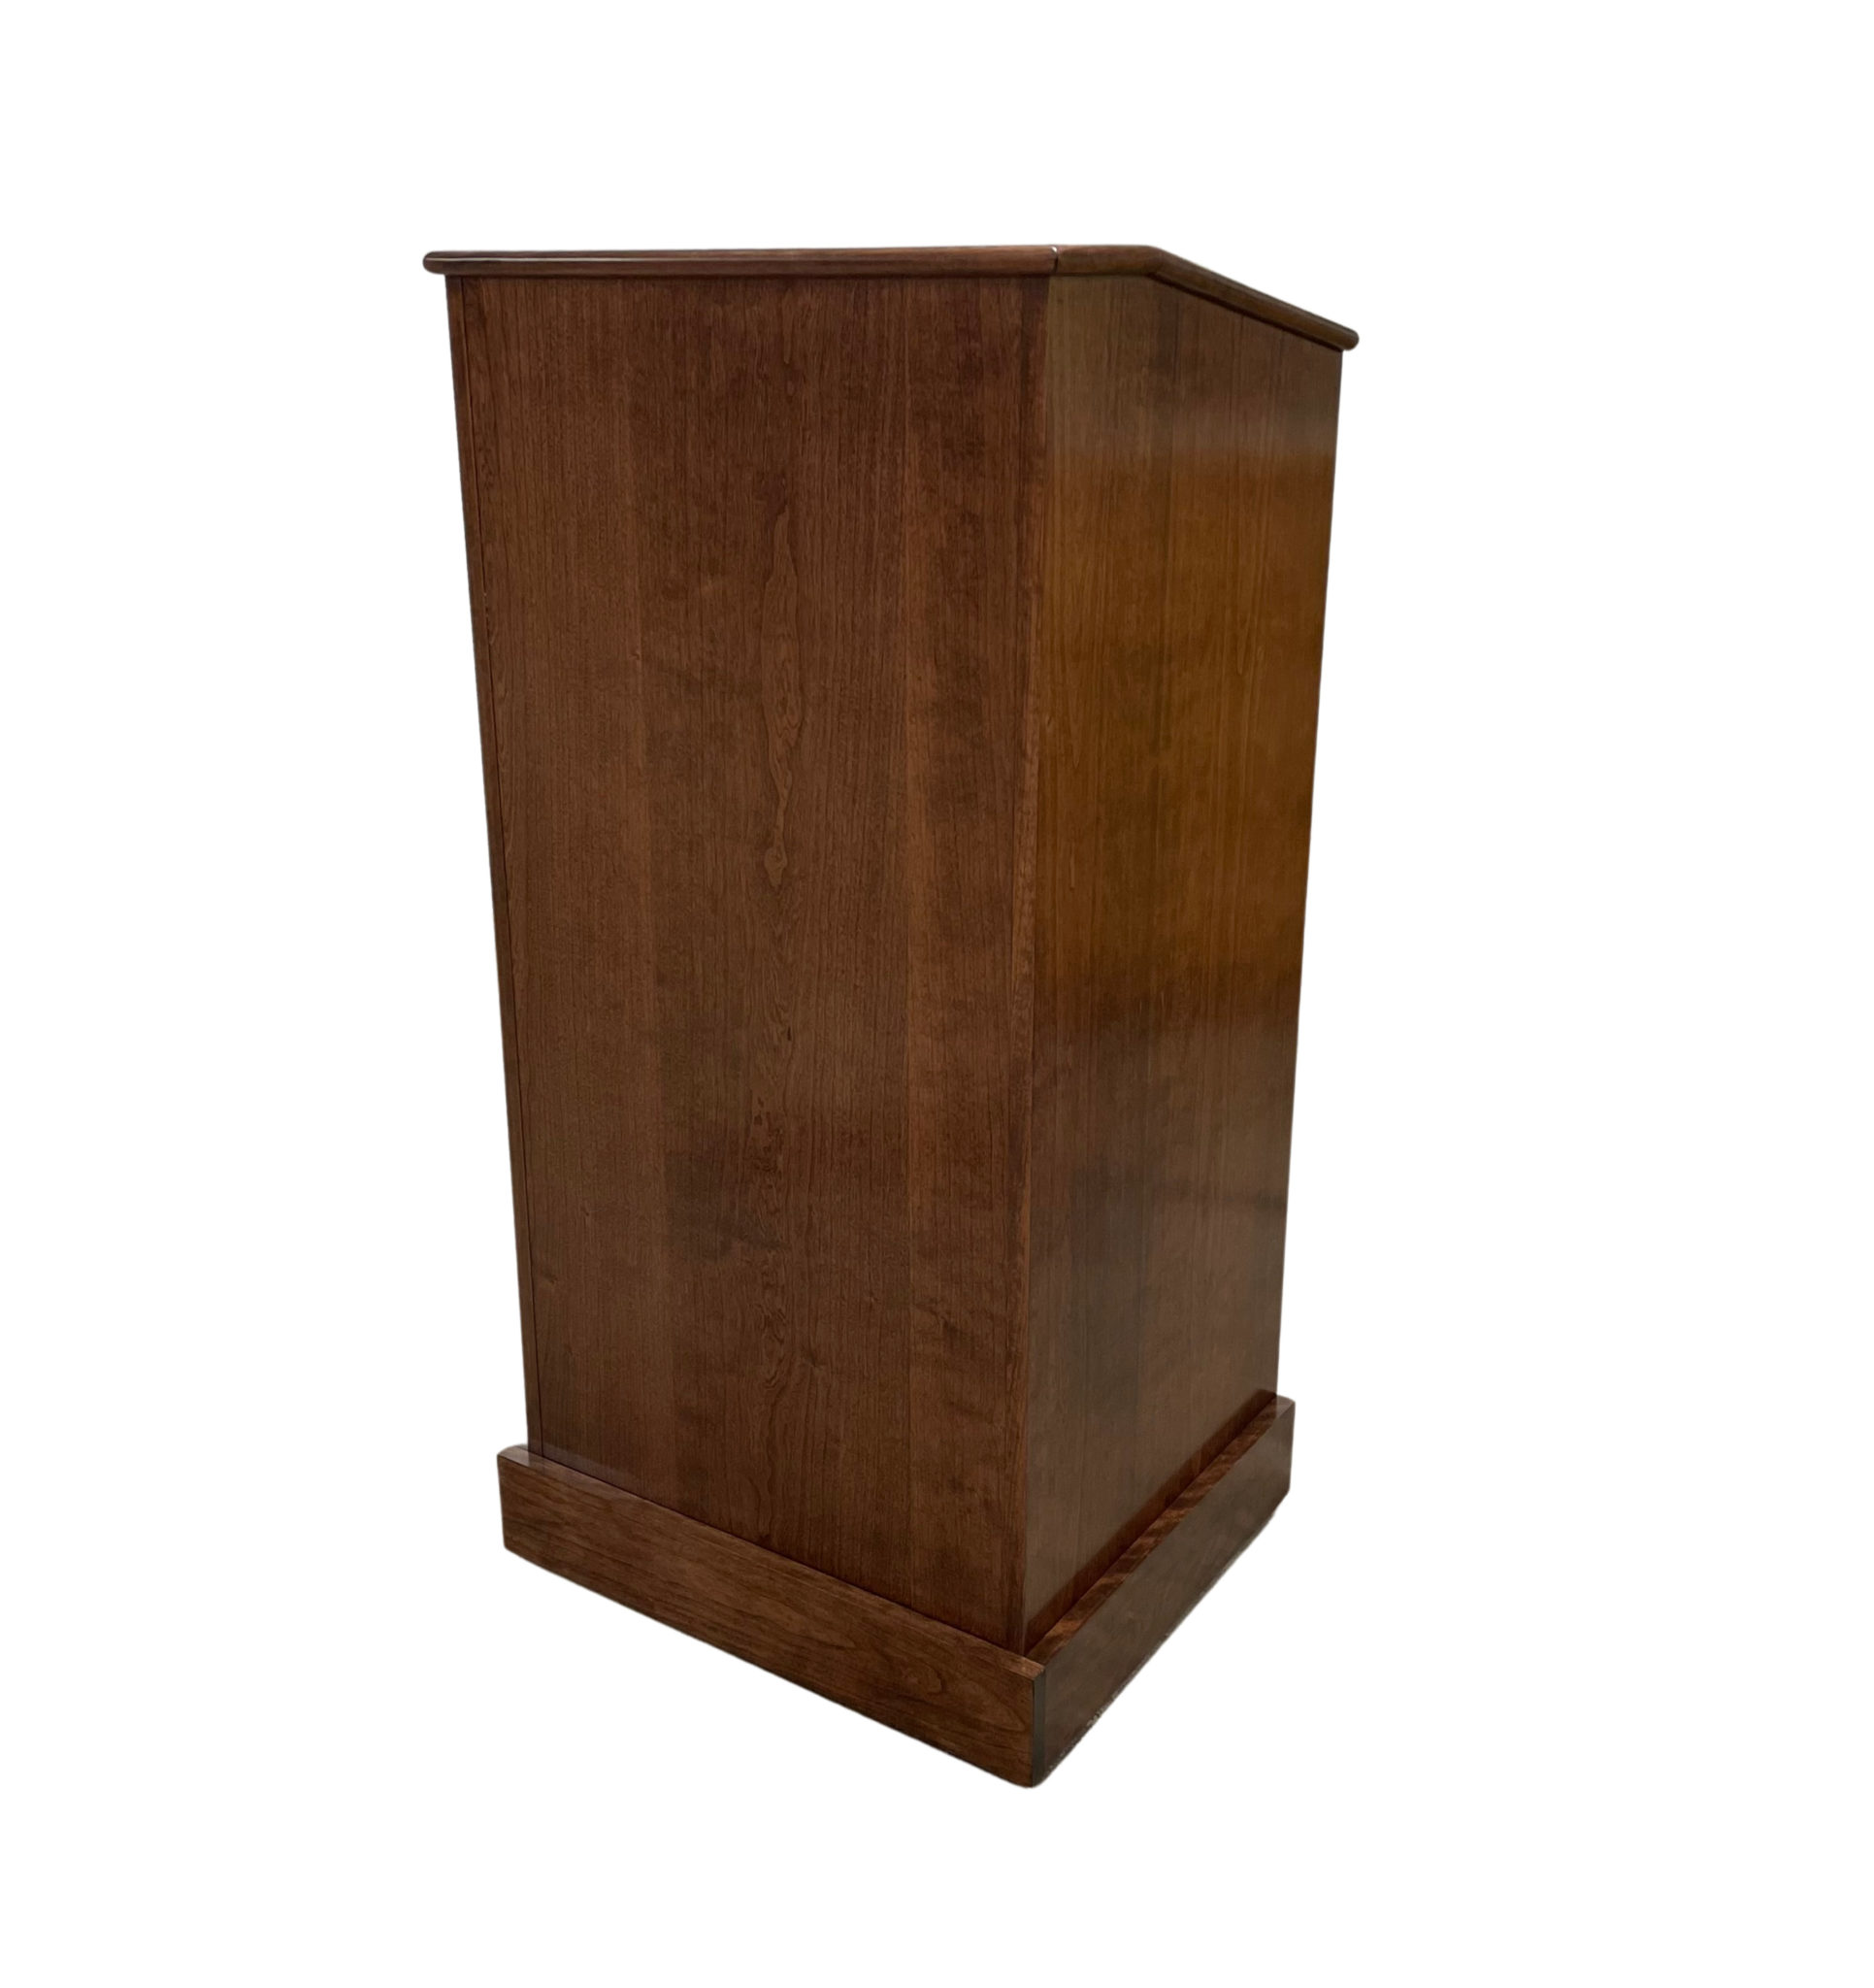 CPD677-C-RM Collegiate Cherry with Red Mahogany Stain Front View